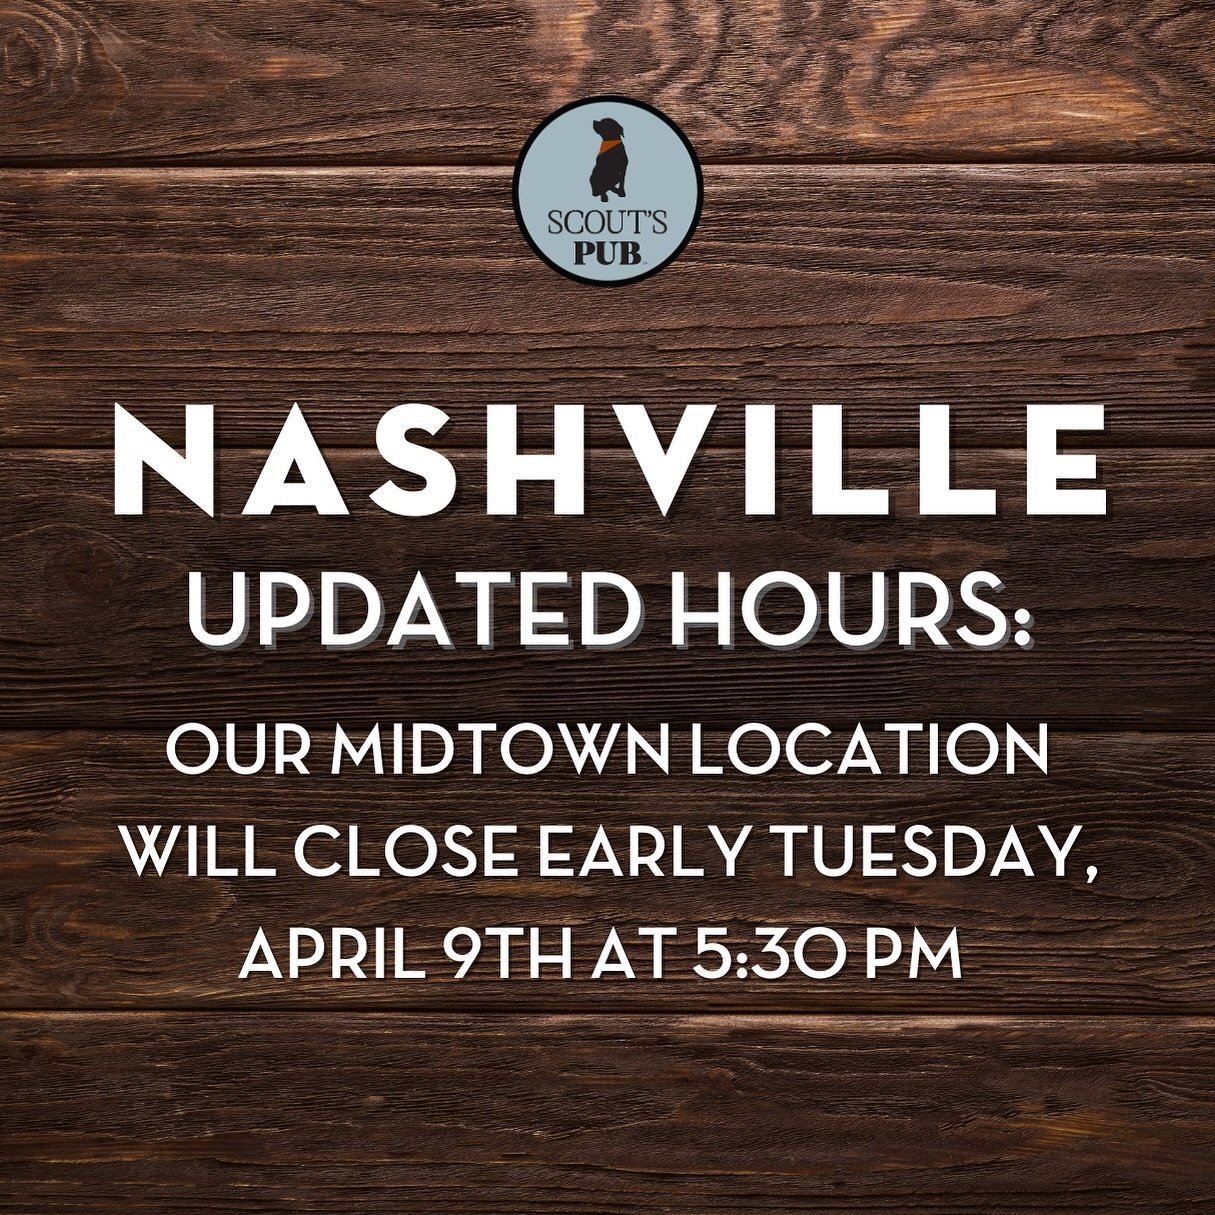 🌟 Attention, Scout&rsquo;s Pub fans! 🌟 Please note that our Midtown location will be closing early at 5:30 PM on Tuesday, April 9th for a private event. We apologize for any inconvenience and appreciate your understanding! 🙏 ⁣
⁣⁣
⁣Regular hours wi